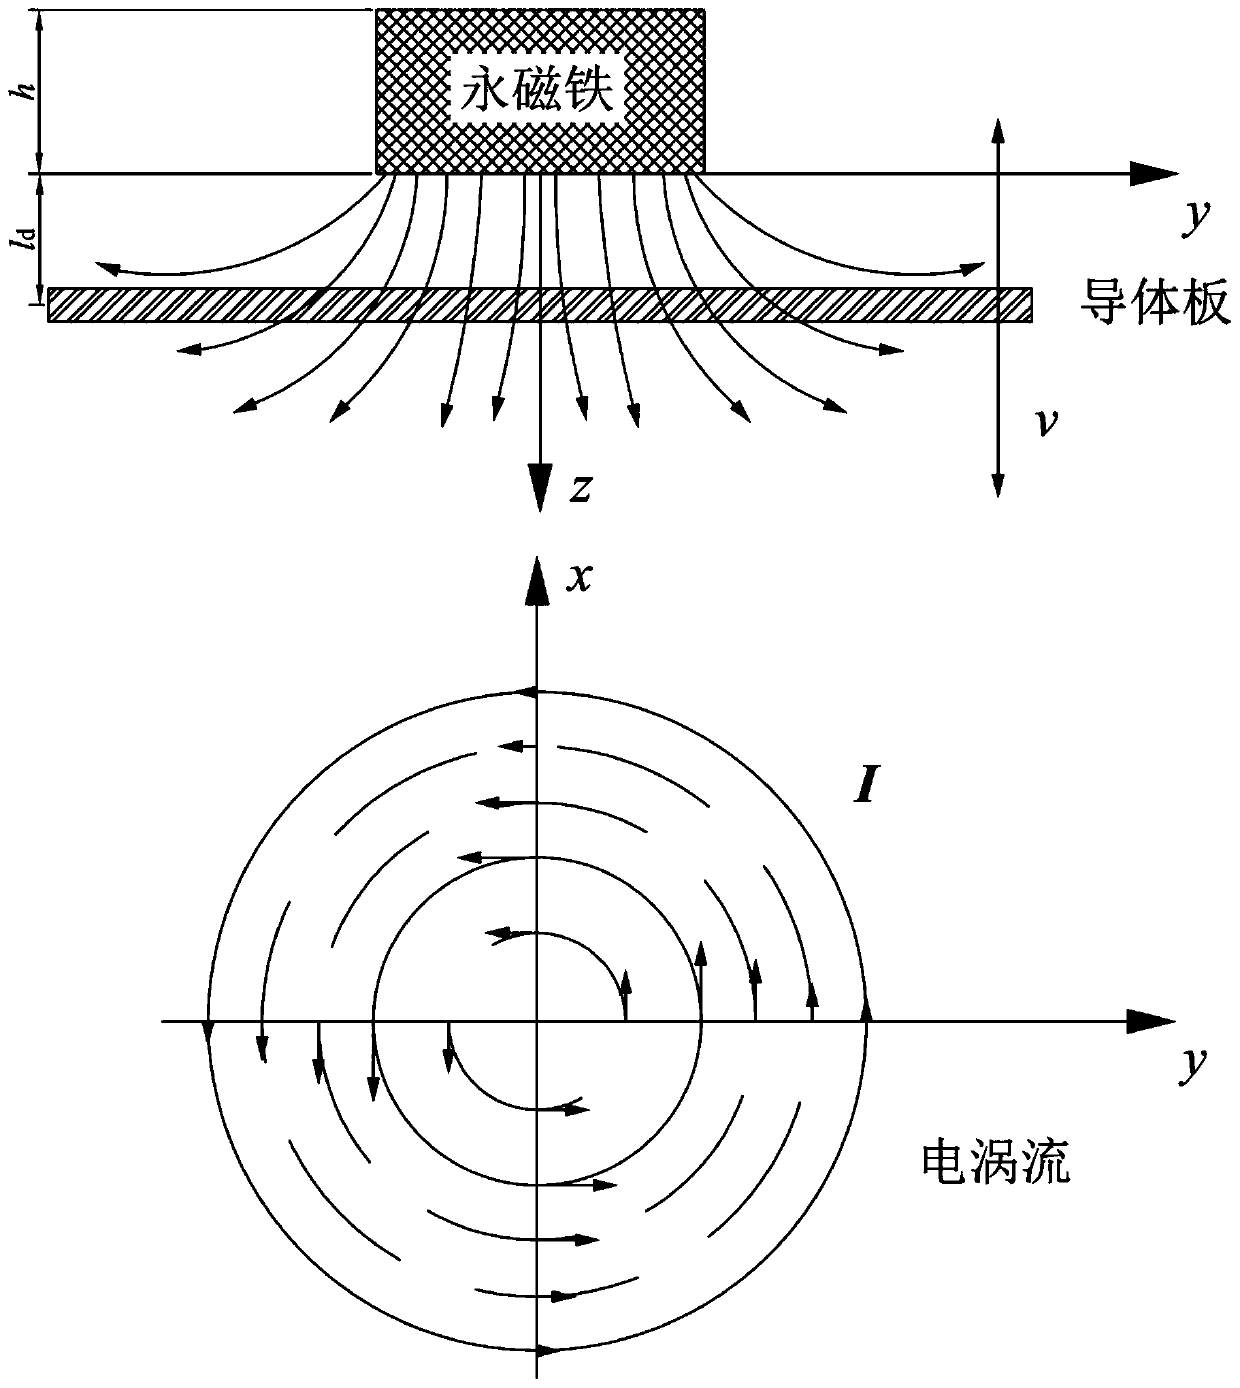 An eddy current tuned mass damper for cableway bridge and its design method